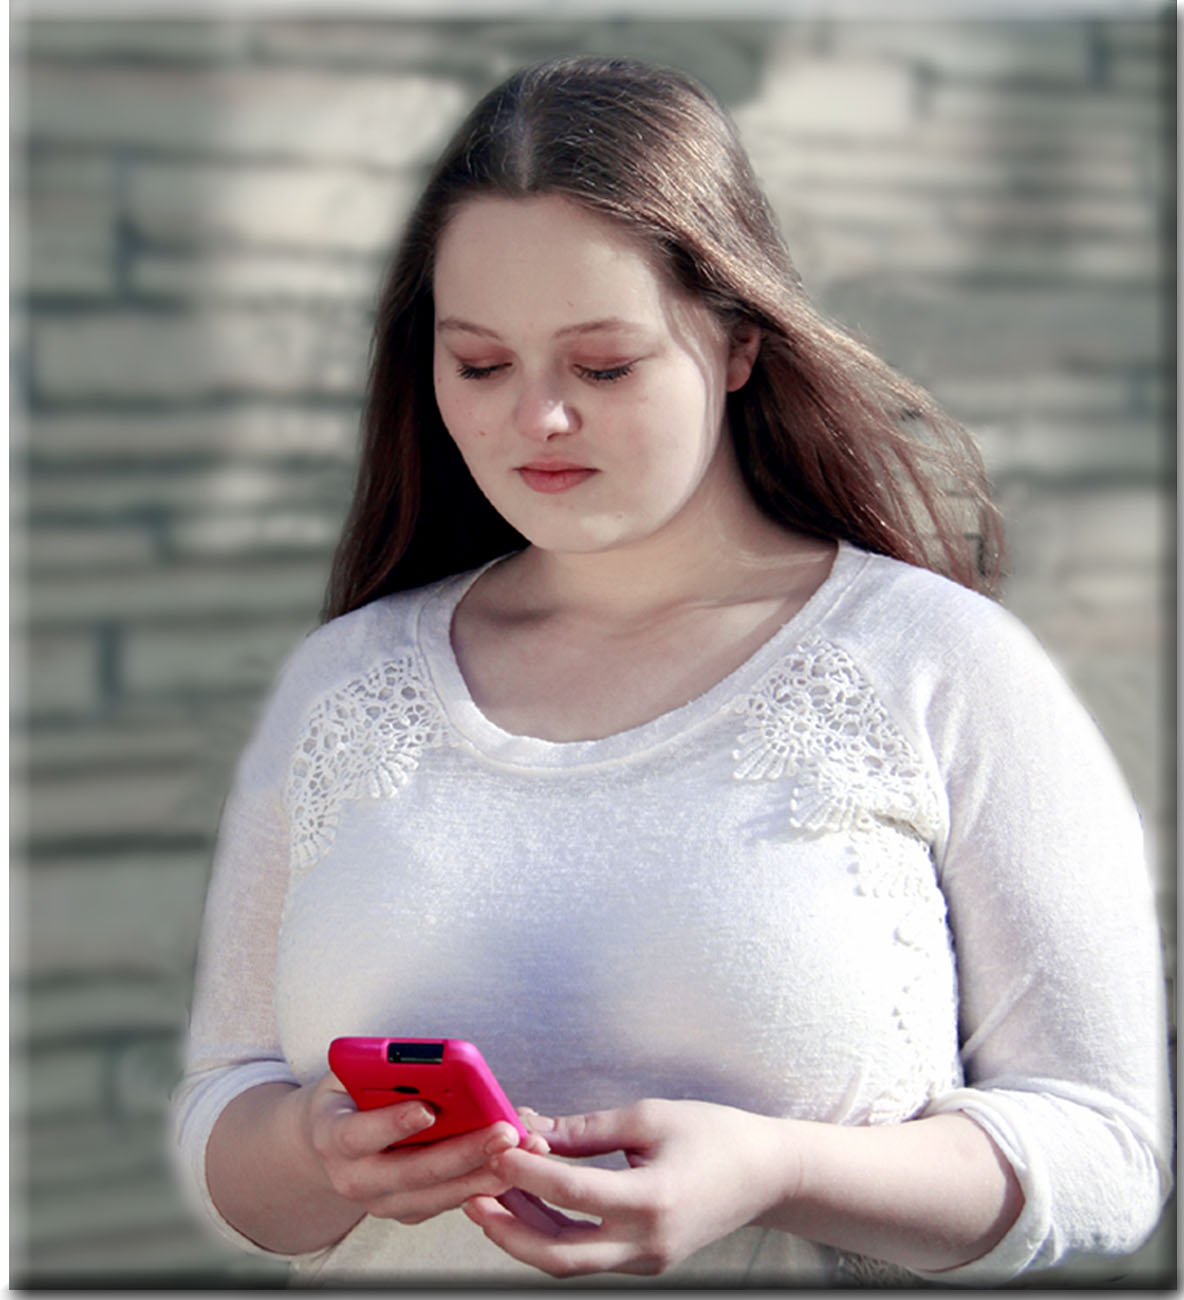 AMANDA_OUTSIDE_WITH_SMART_PHONE__FOUR_BY_SIX_SIZE_PRINT